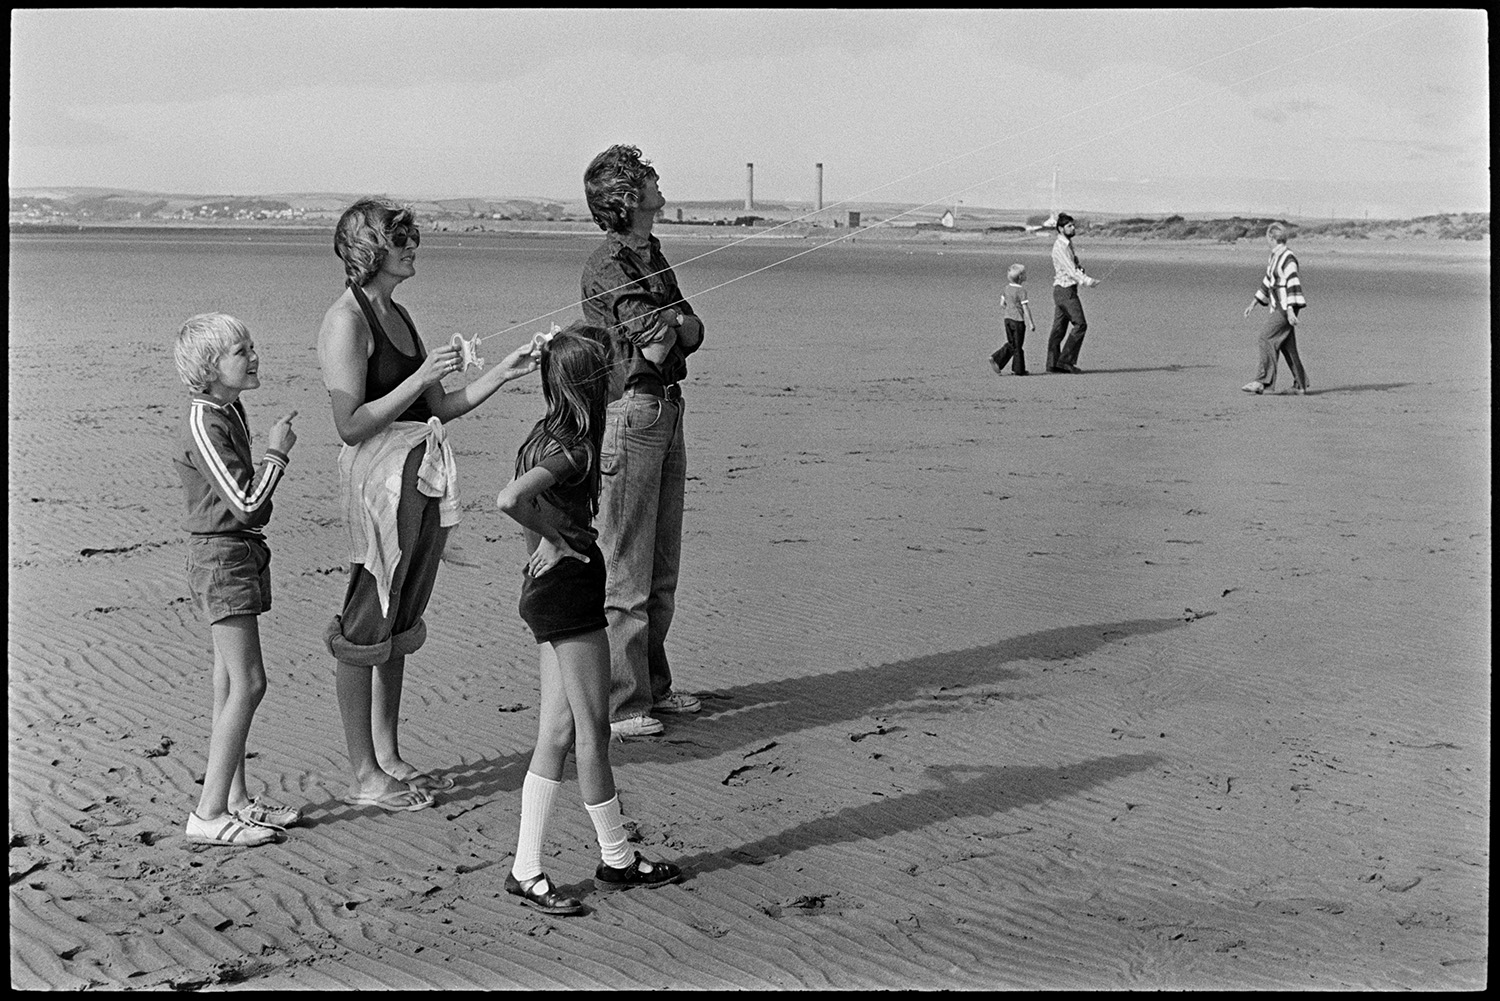 Children playing on beach, kite. Abandoned barge. 
[A family flying a kite on the beach at Instow. Sand dunes and Yelland power station are visible in the background.]